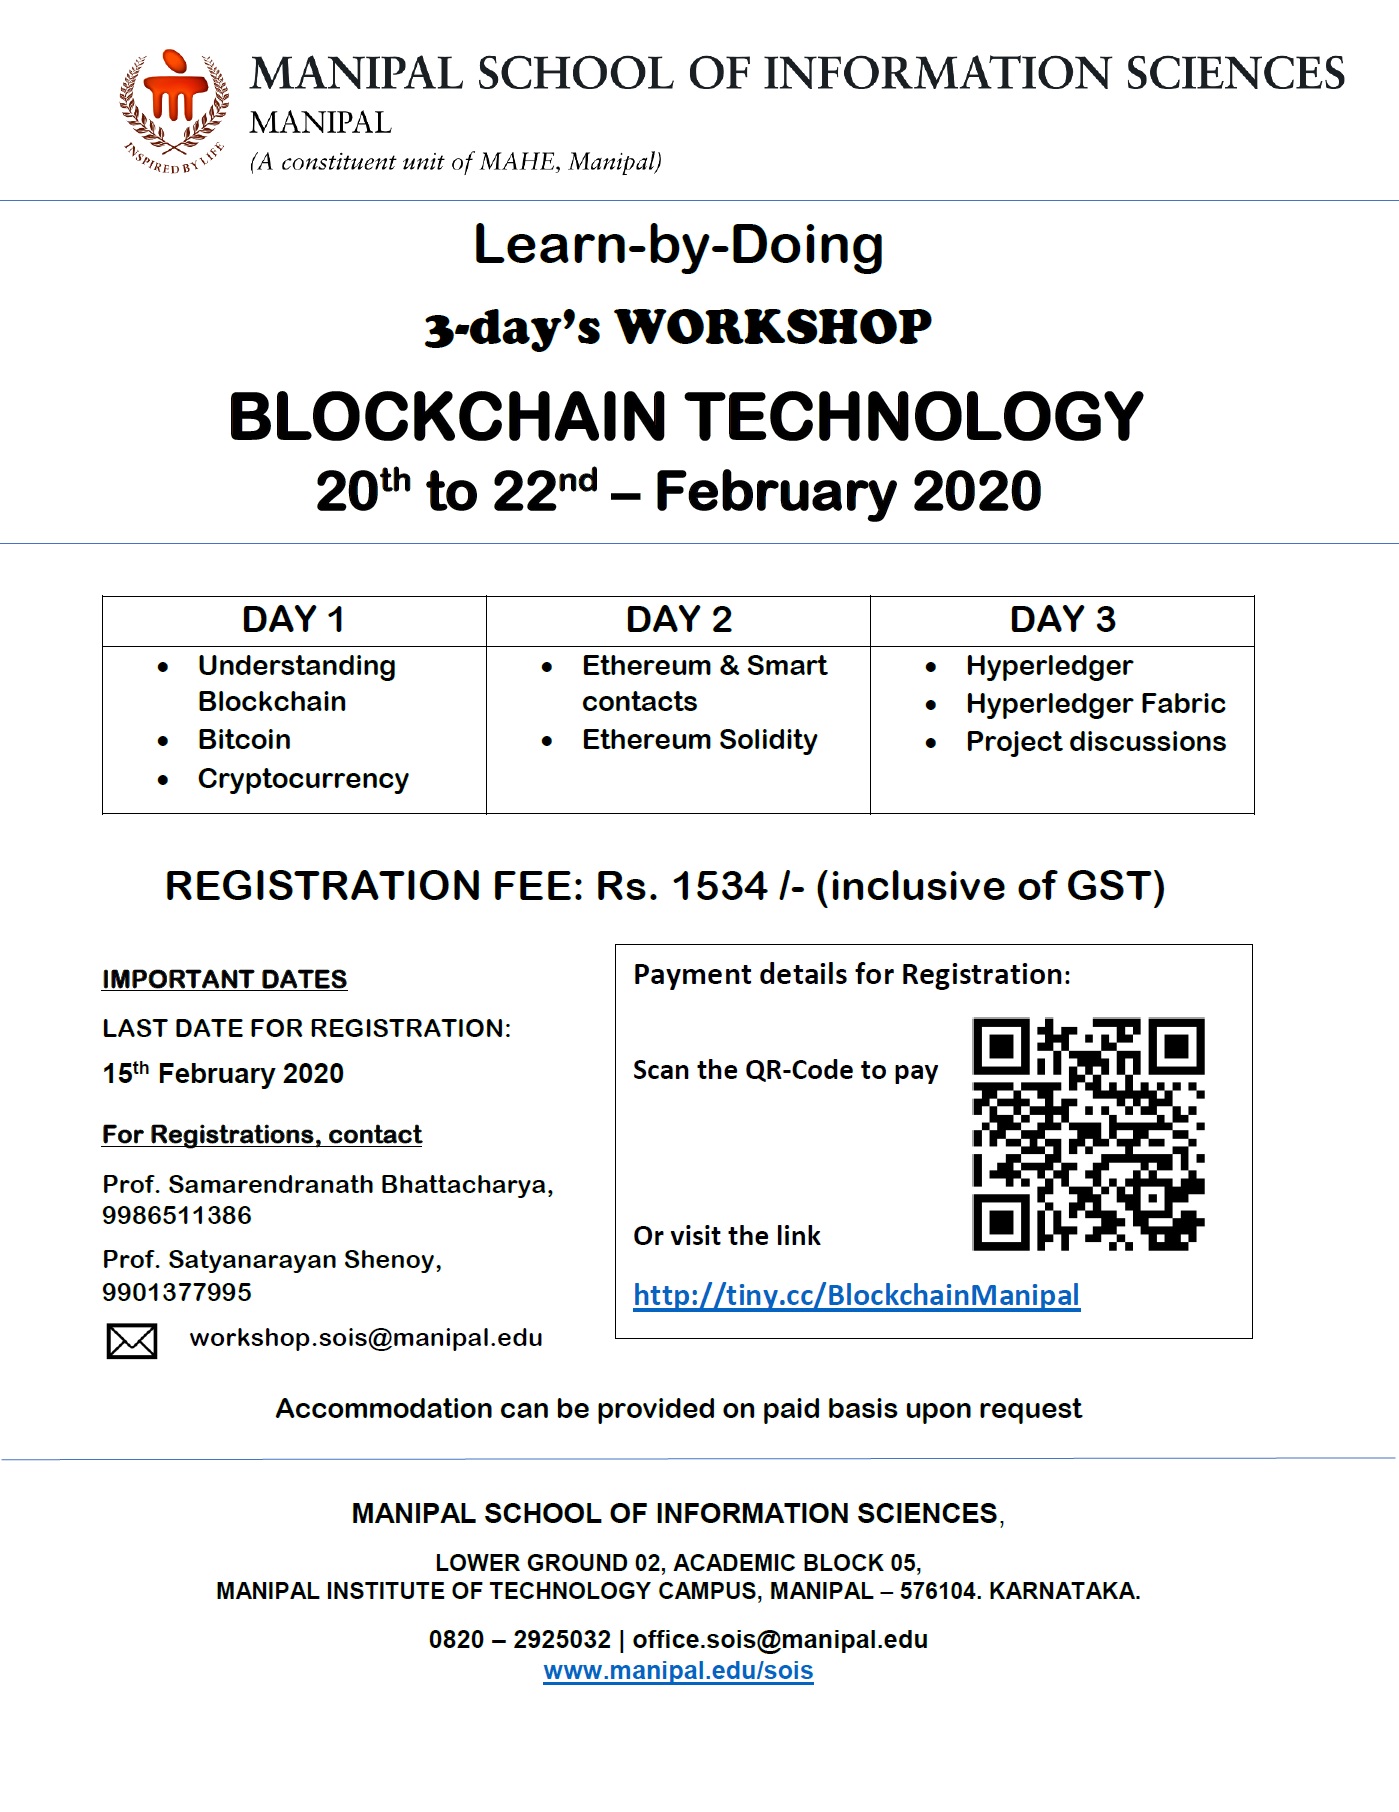 Learn by Doing Workshop on Blockchain Technology 2020